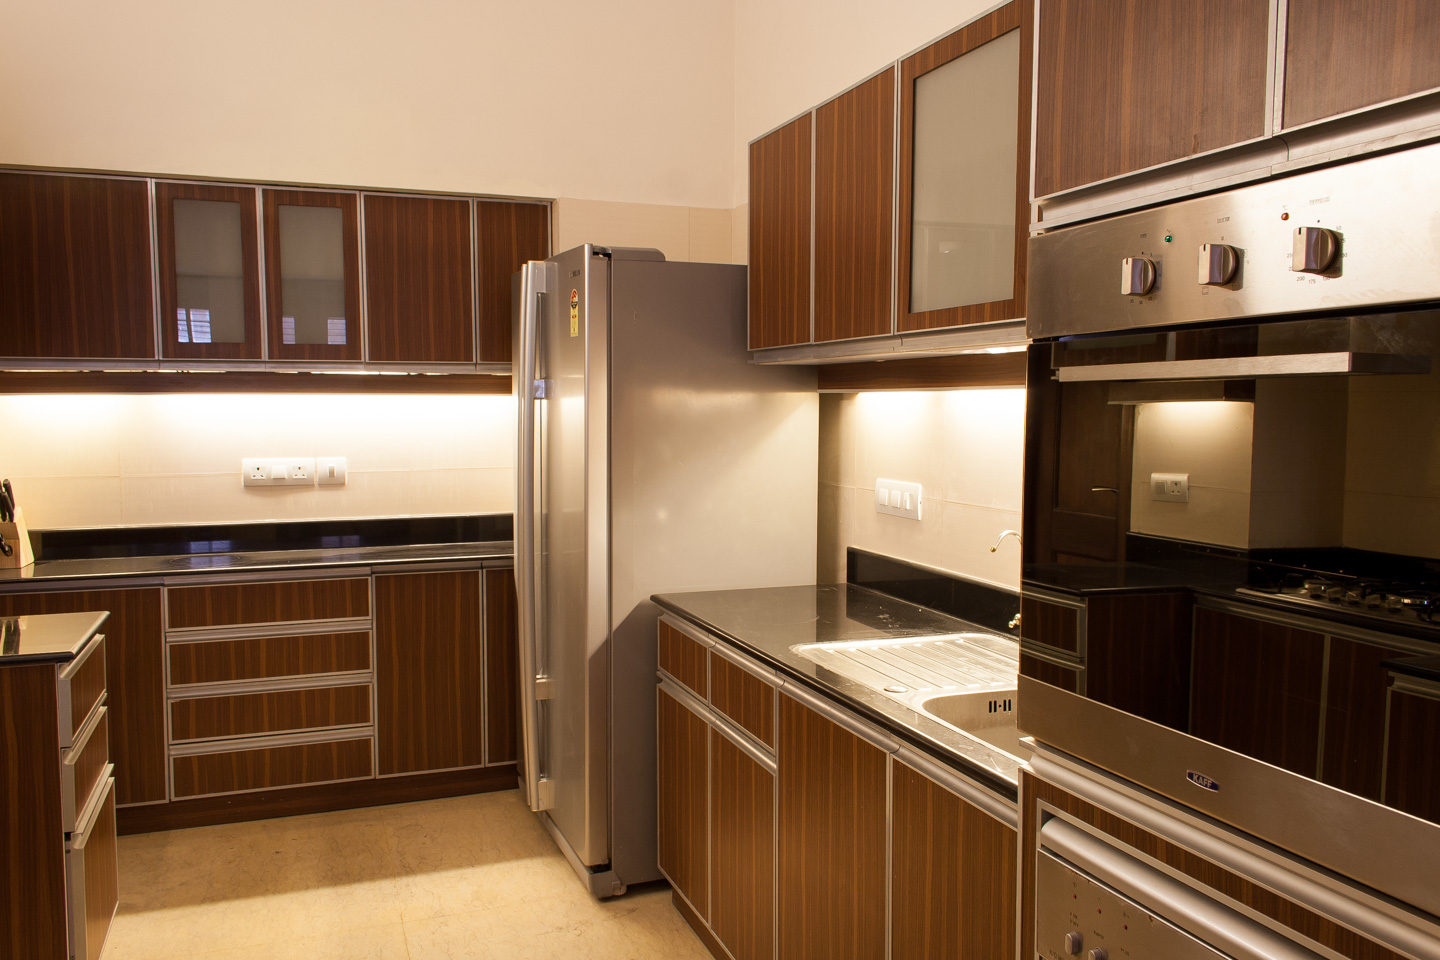 The modular kitchen finished with a wood look.